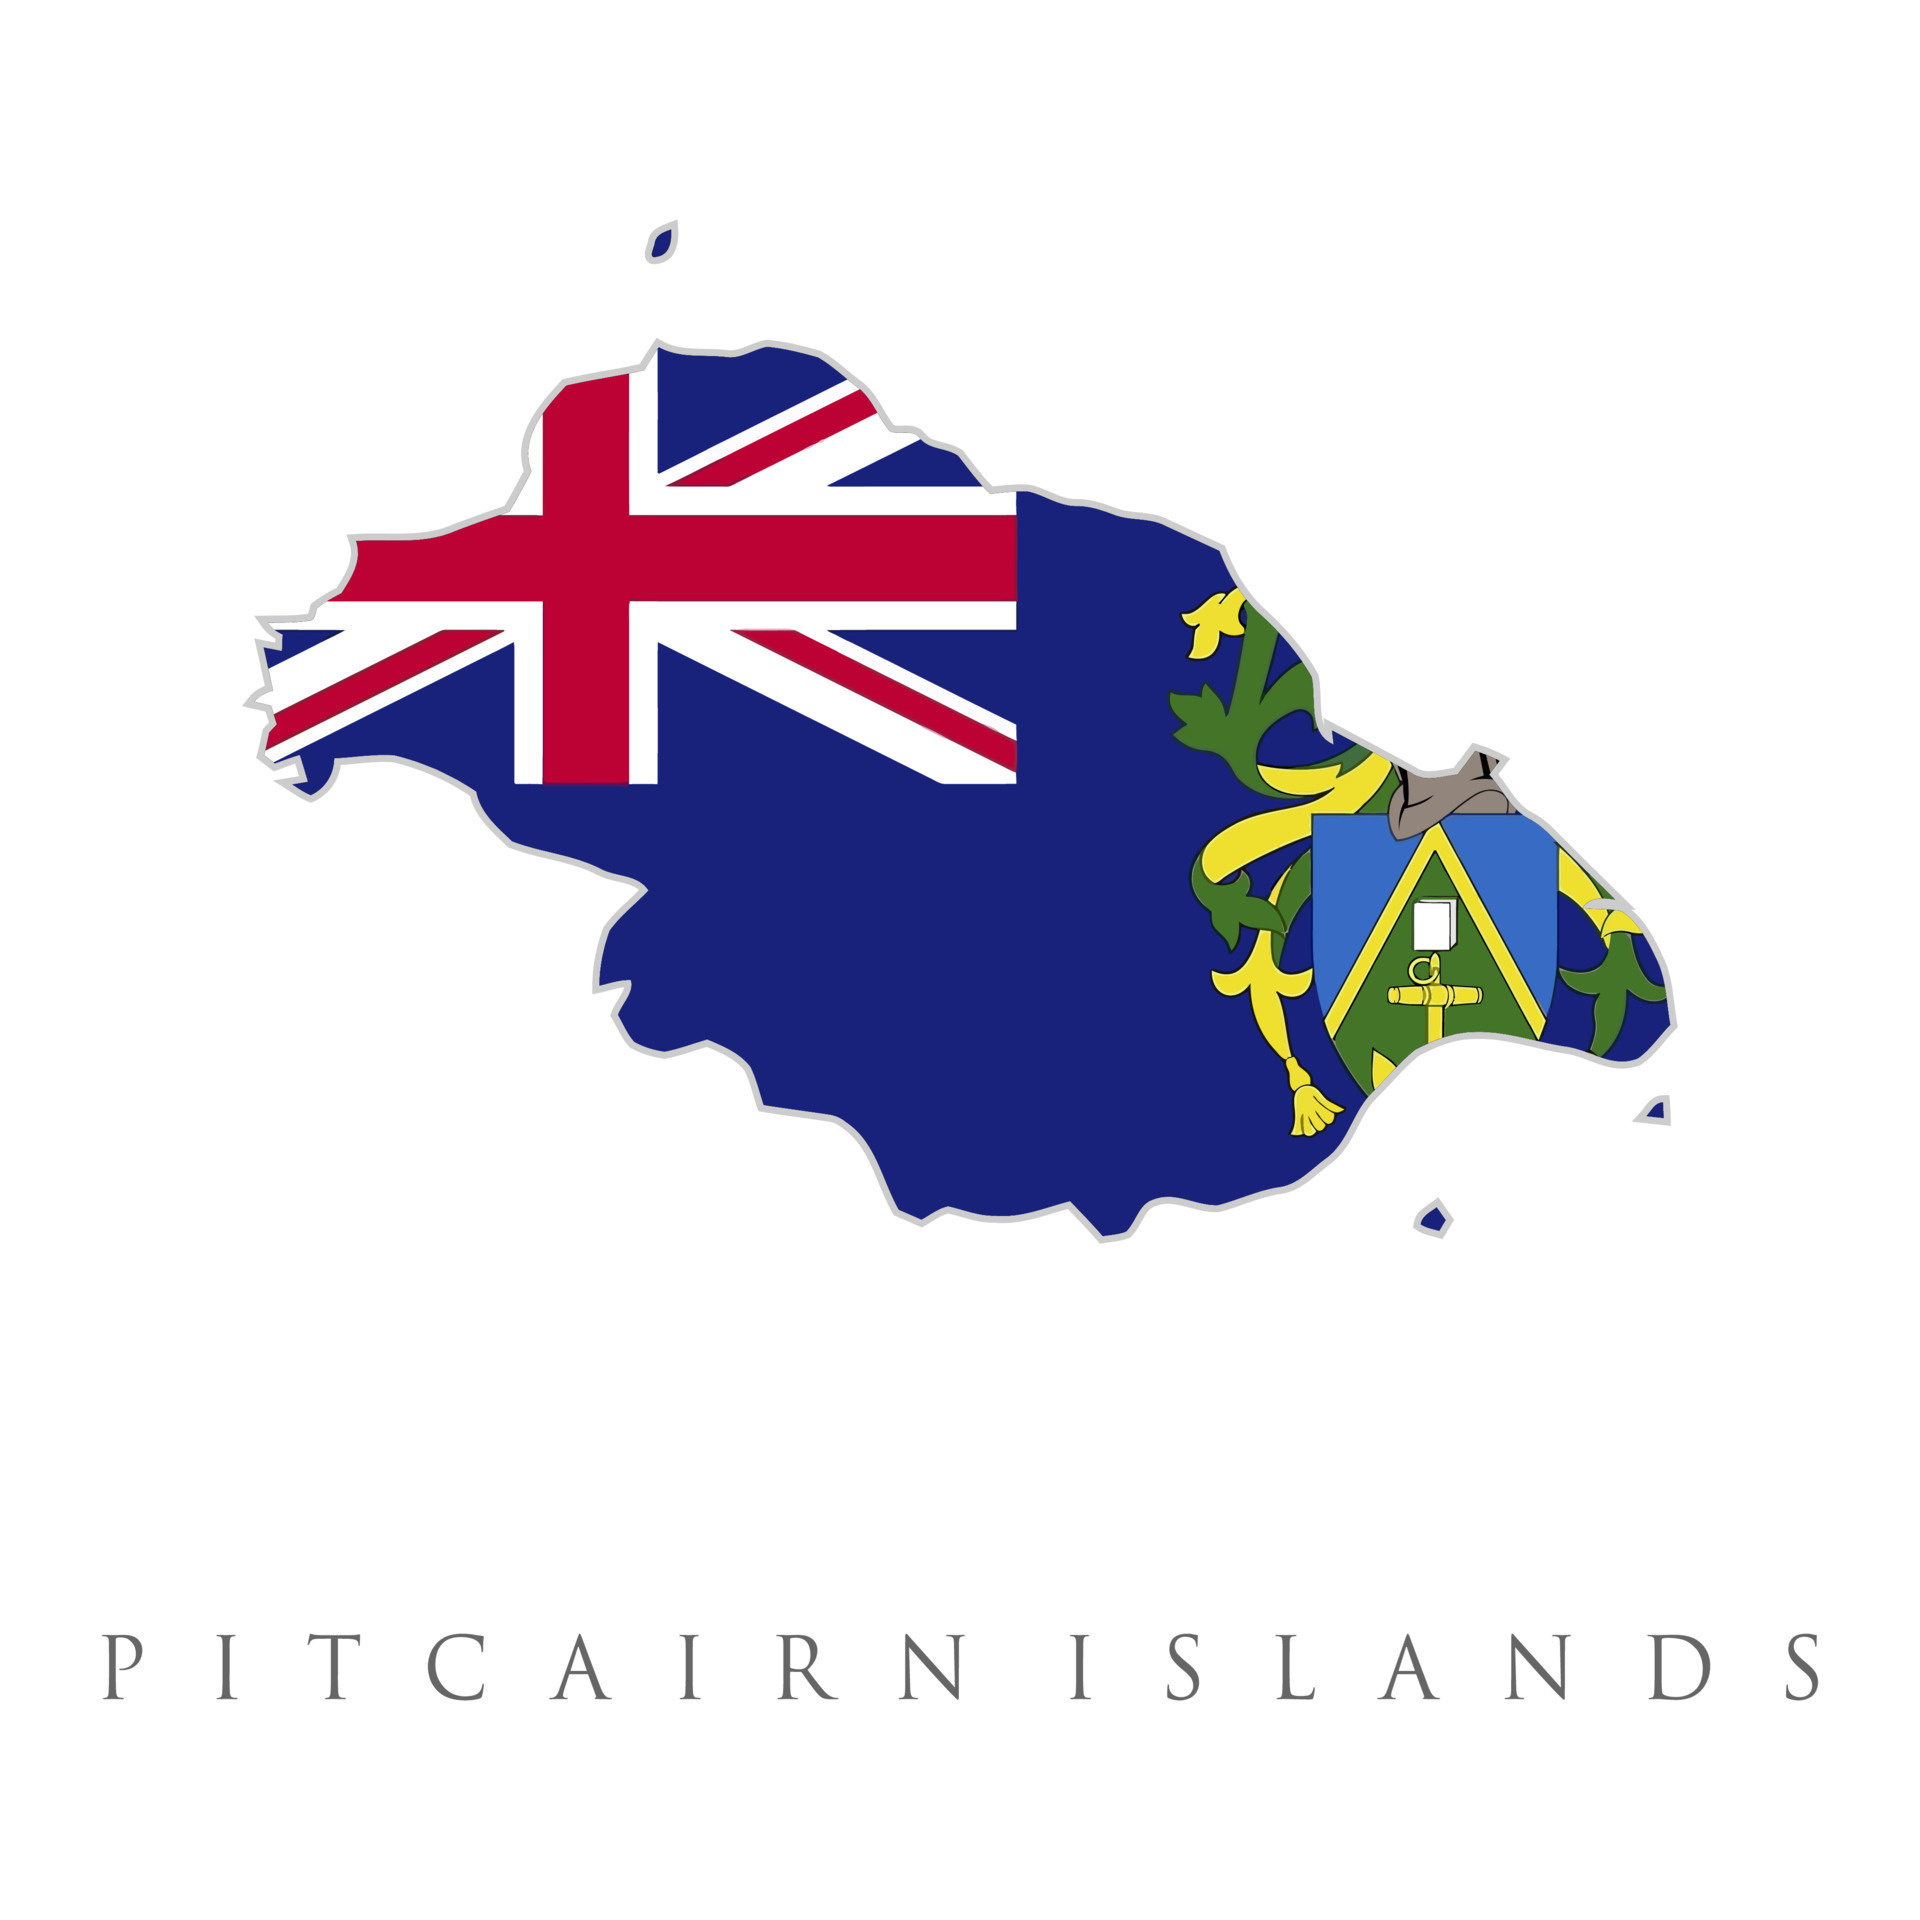 Pitcairn Islands Wallpapers (14+ images inside)